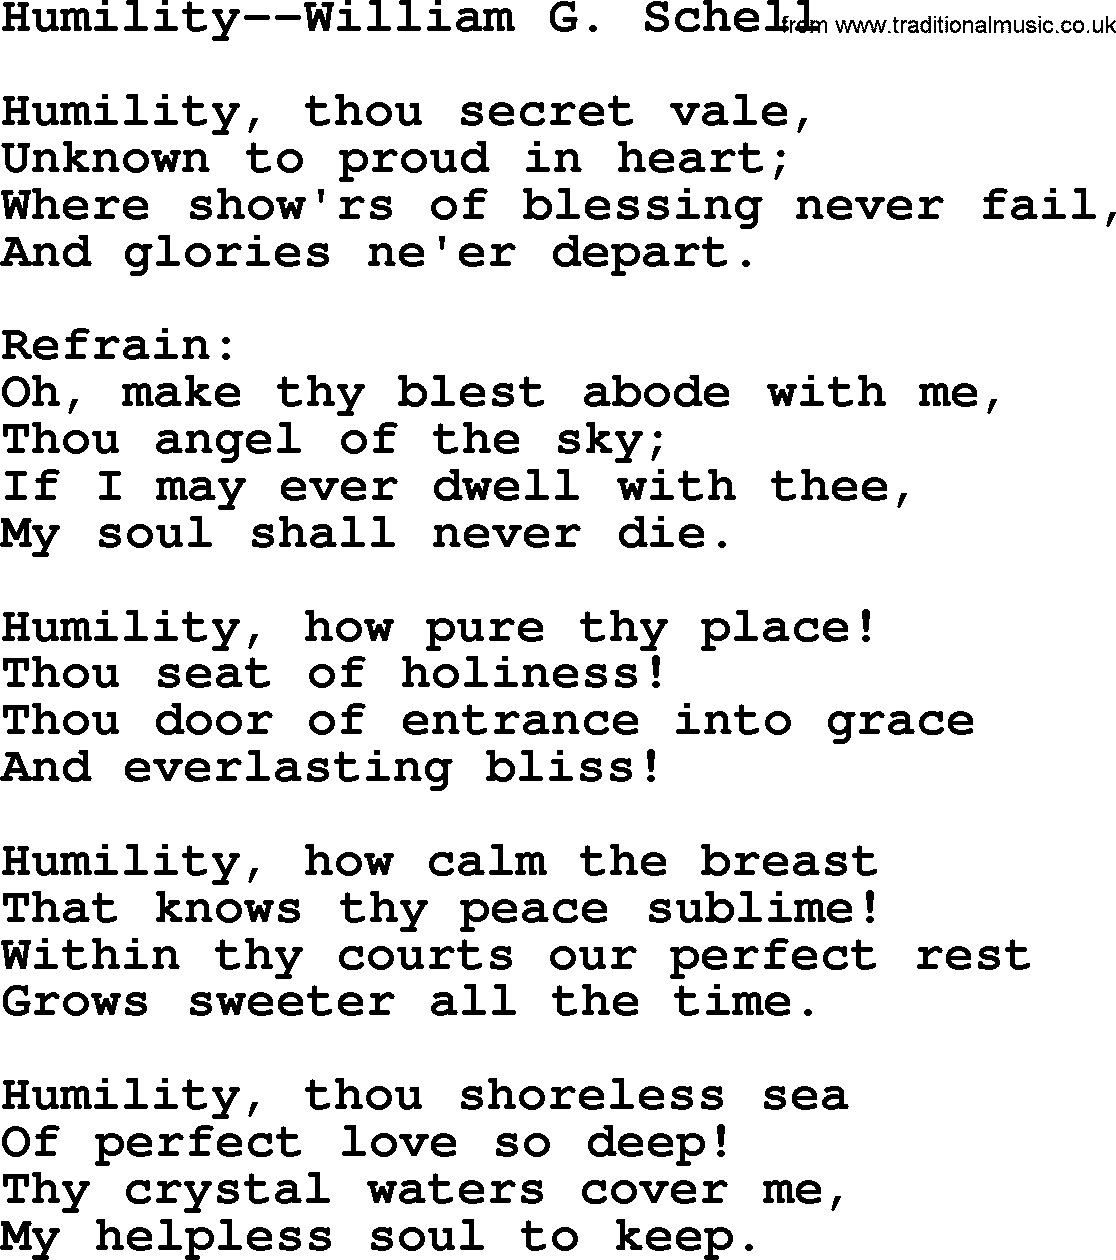 Hymns about Angels, Hymn: Humility--william G. Schell.txt lyrics with PDF